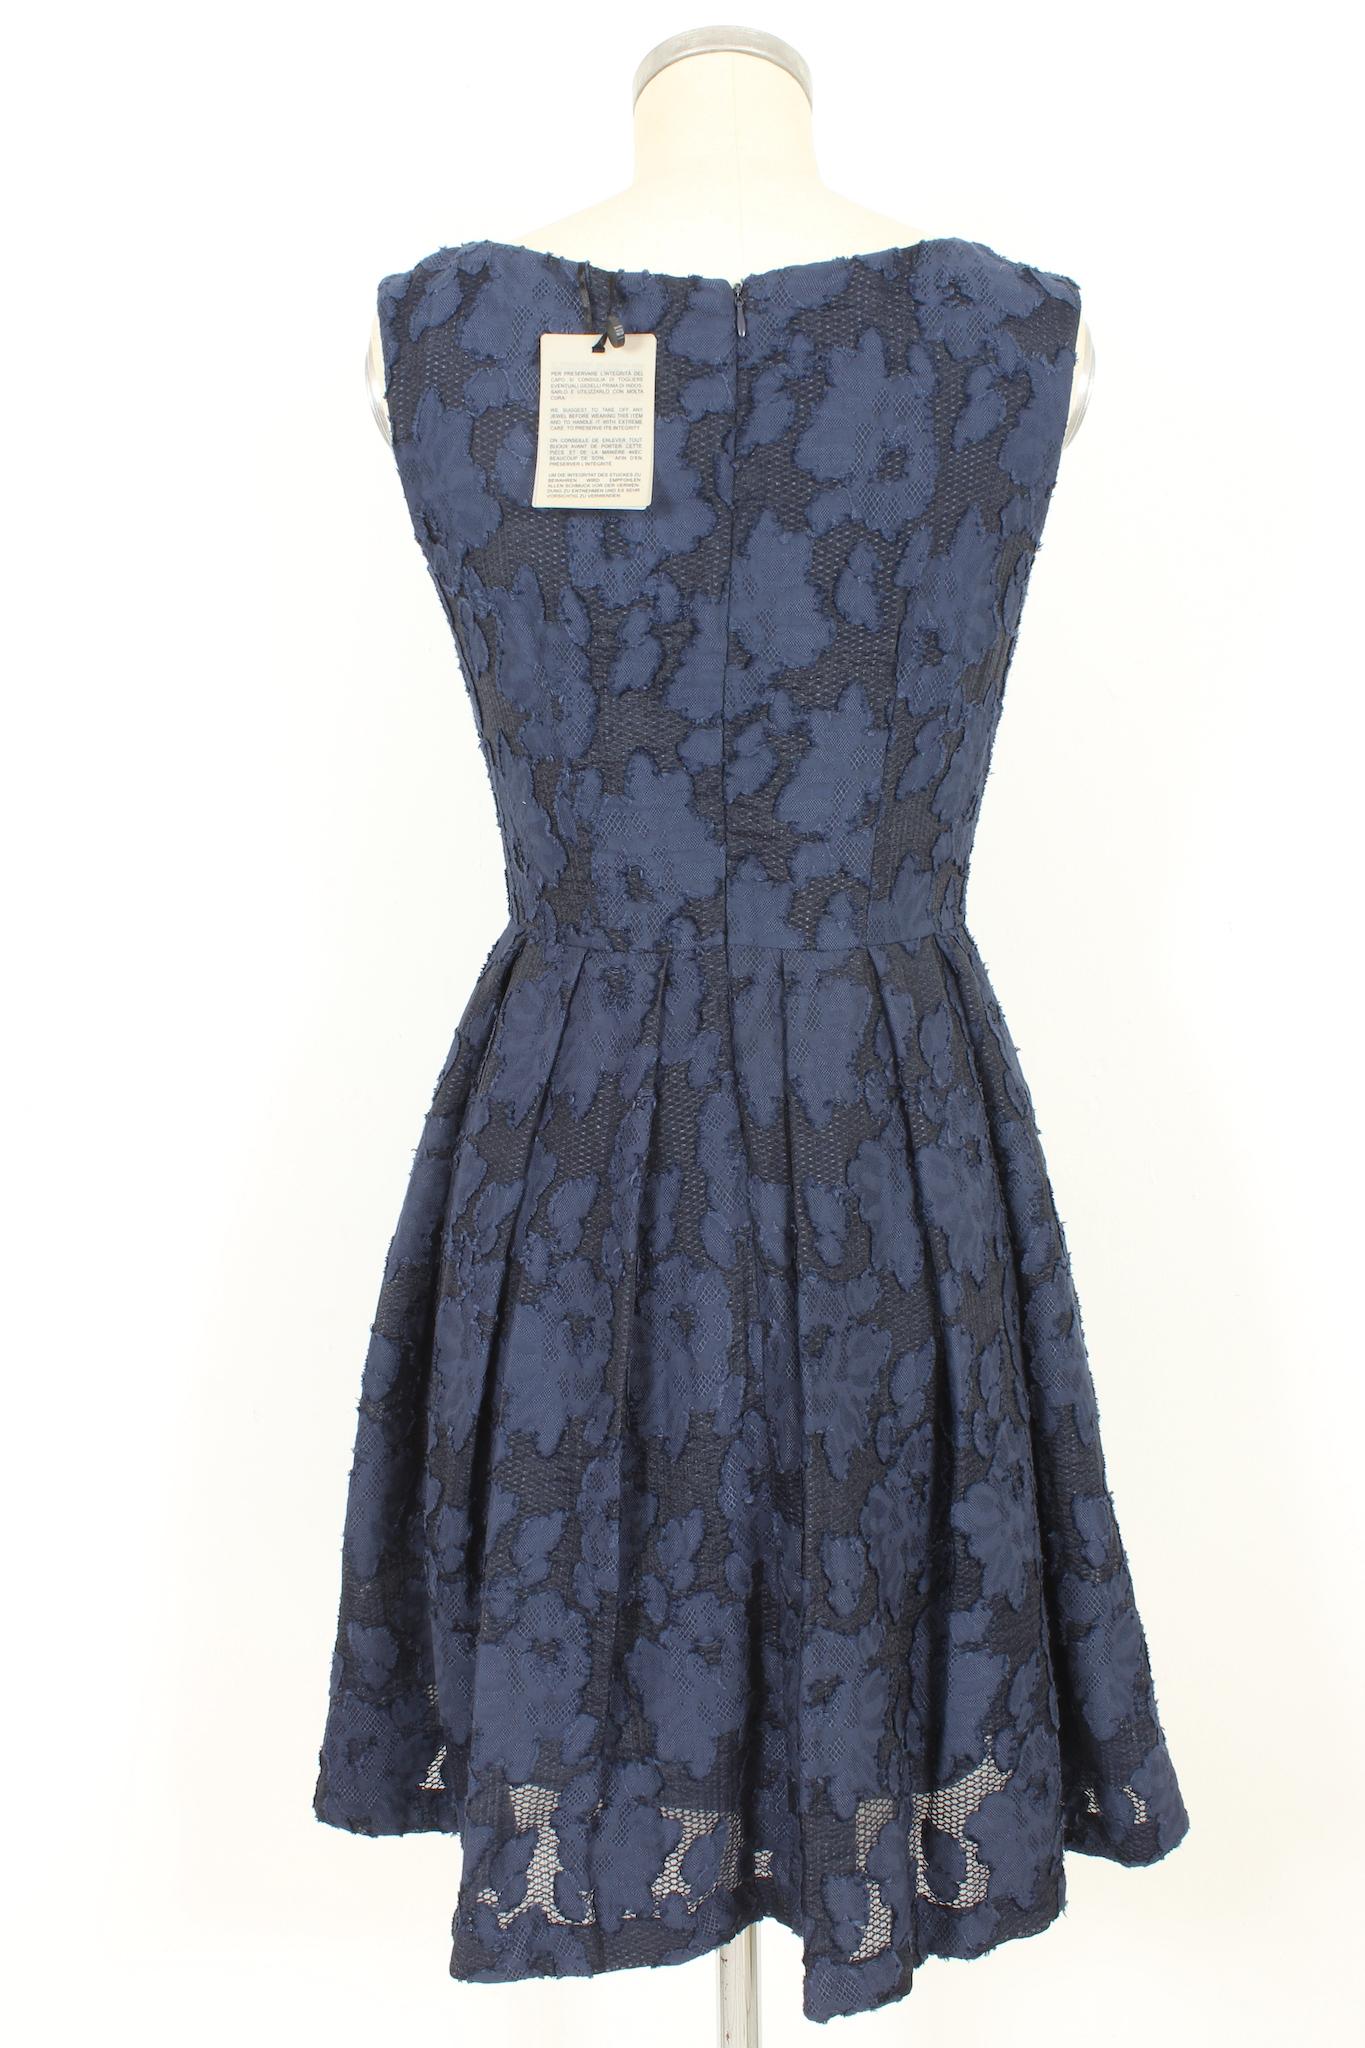 Blumarine by blugirl elegant dress 2000s. Blue flared sheath dress, floral lace pattern. Zip closure on the back. Fabric 76% viscose, 24% polyimide. Made in Italy.

Size: 42 It 8 Us 10 Uk

Shoulder: 40 cm
Bust/Chest: 45 cm
Waist: 35 cm
Length: 93 cm